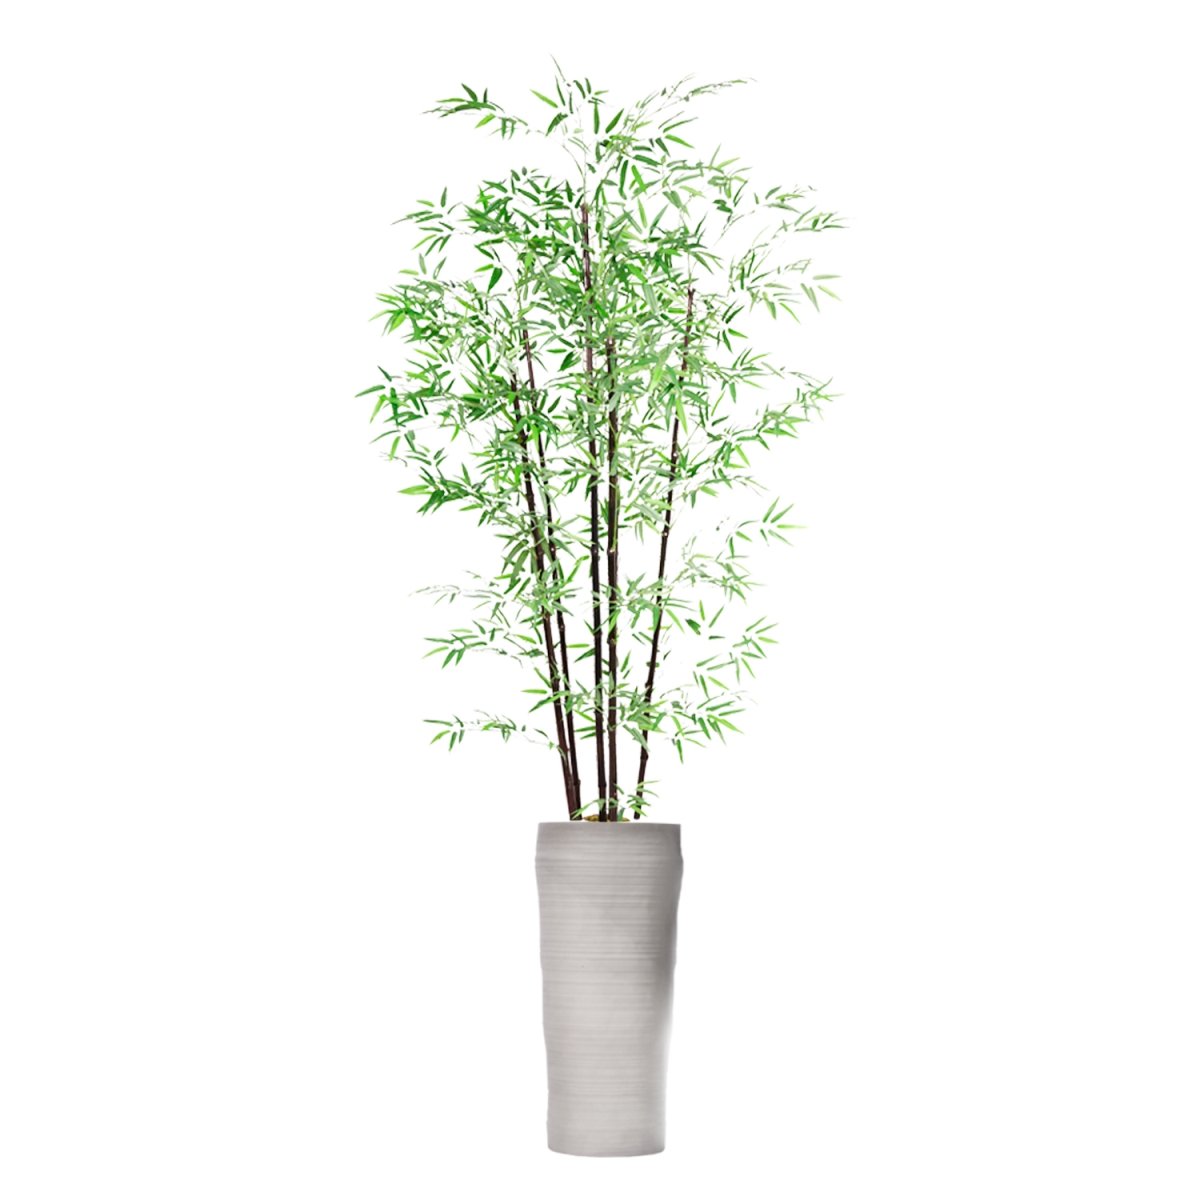 Vhx106218 93 In. Tall Bamboo Tree In Planter